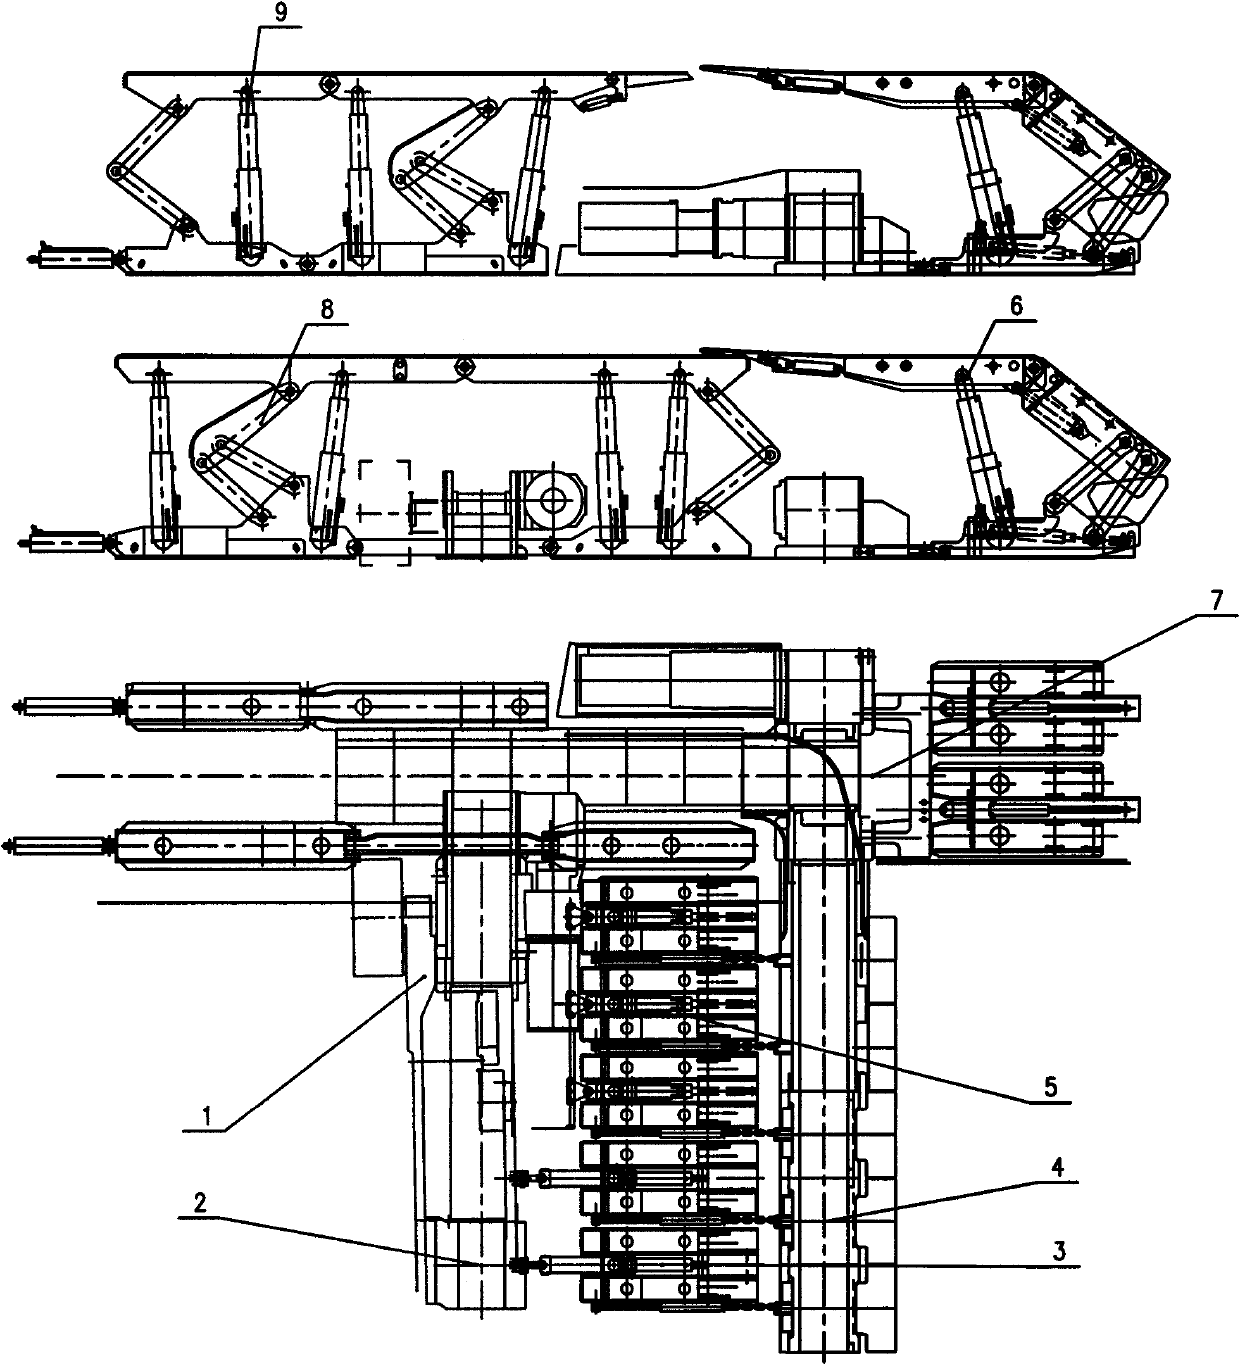 Cross side dumping arrangement coordinated mode of rear conveyer of fully mechanized working face and support structure